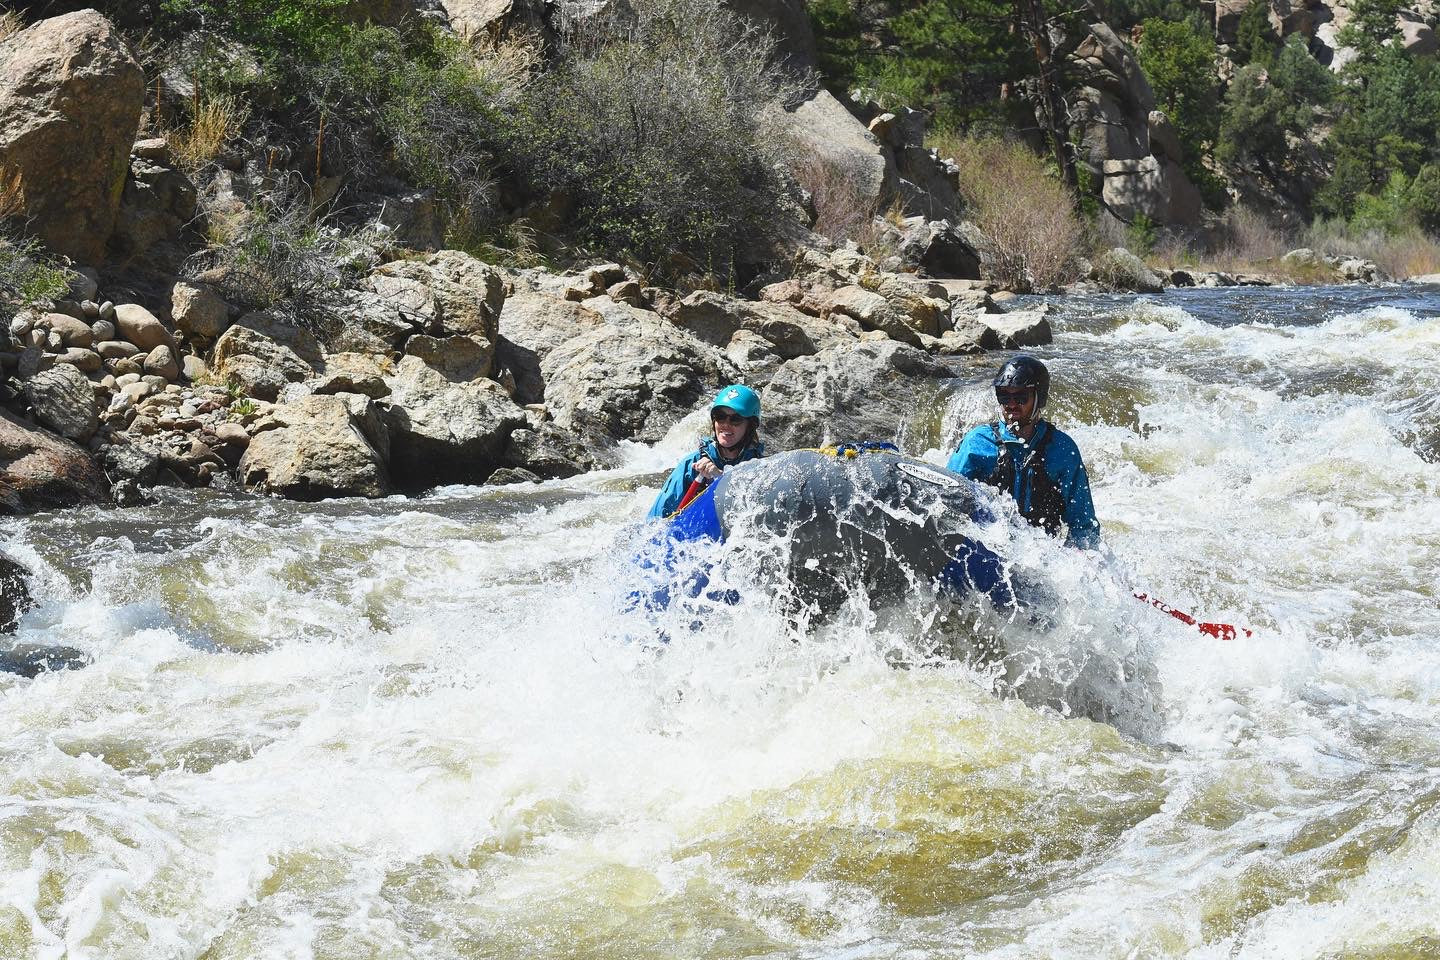 Whitewater rafting in Browns Canyon on the Arkansas River